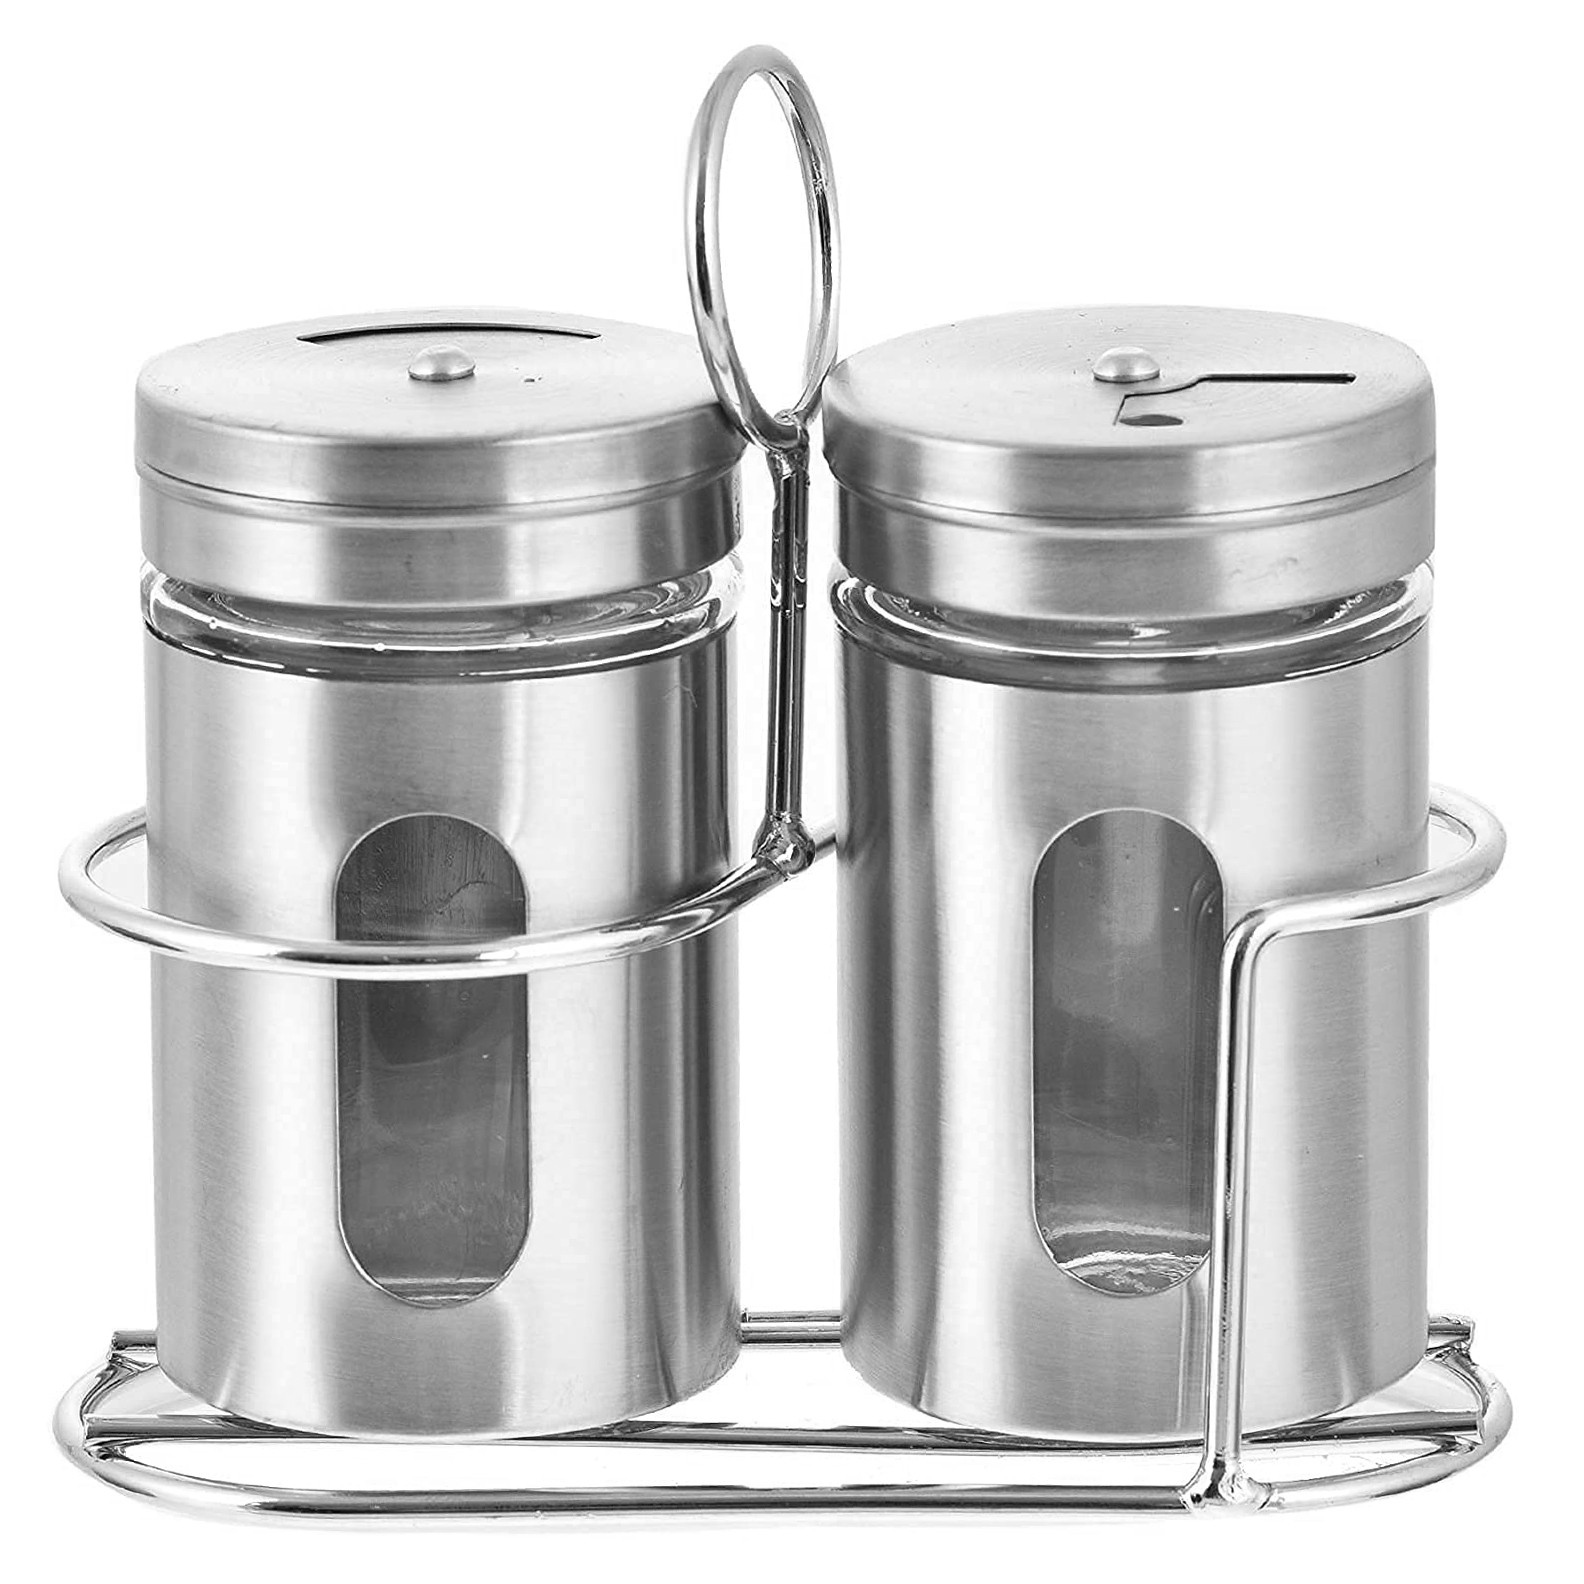 Kuber Industries Stainless Steel Salt and Pepper Shakers For Dining Table, Kitchen with Adjustable Pour Holes & Holder, Set of 2 (Silver)